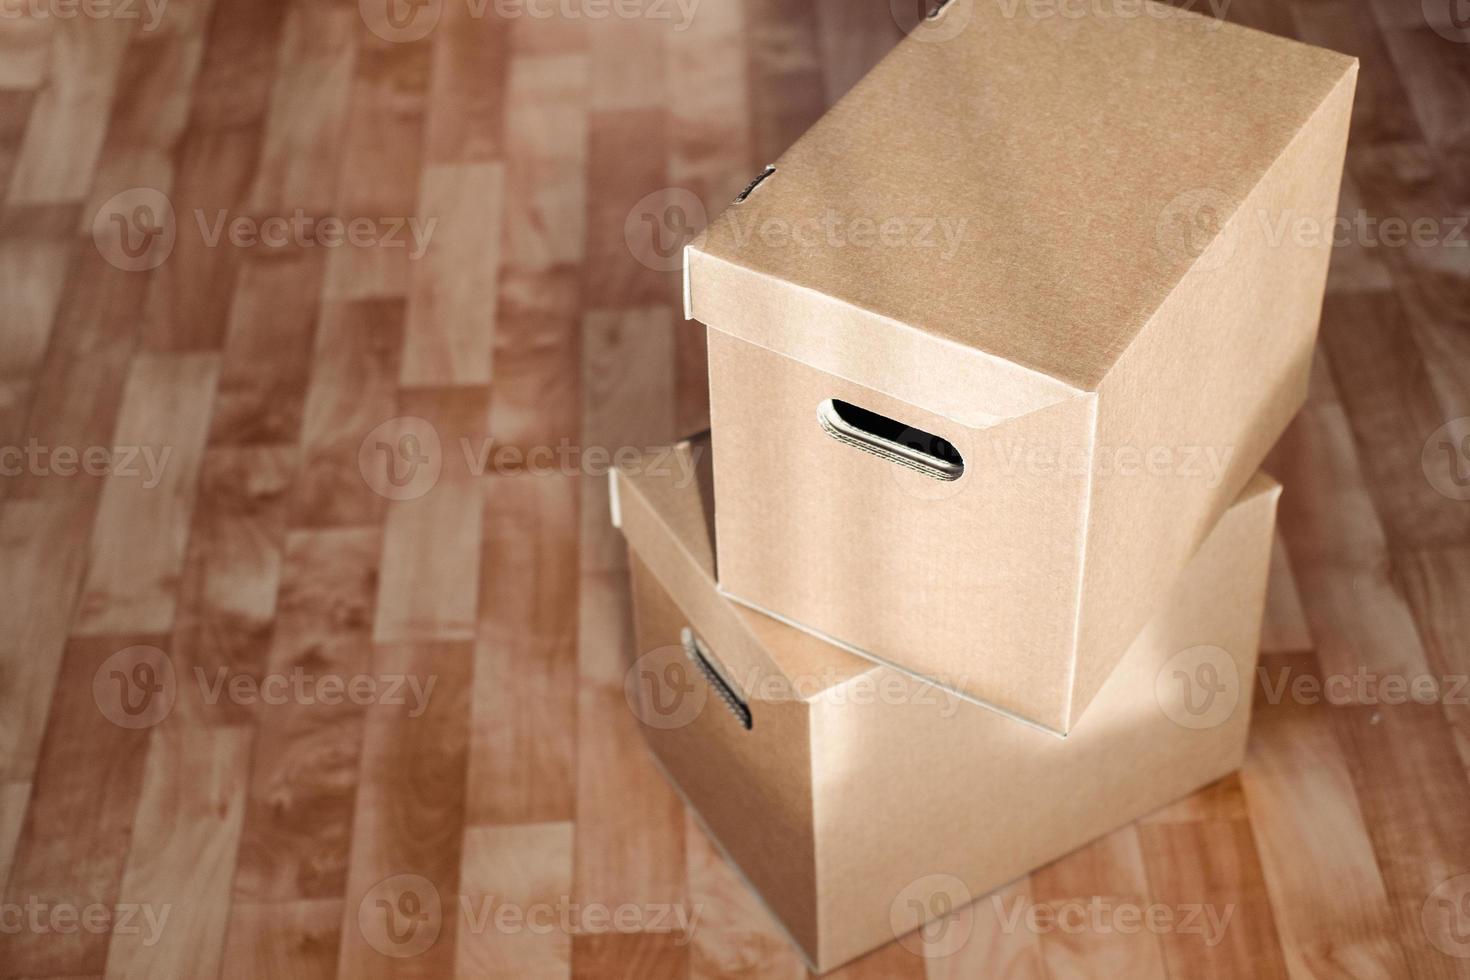 boxes on top of each other close-up on the floor. Moving theme with cardboard boxes photo